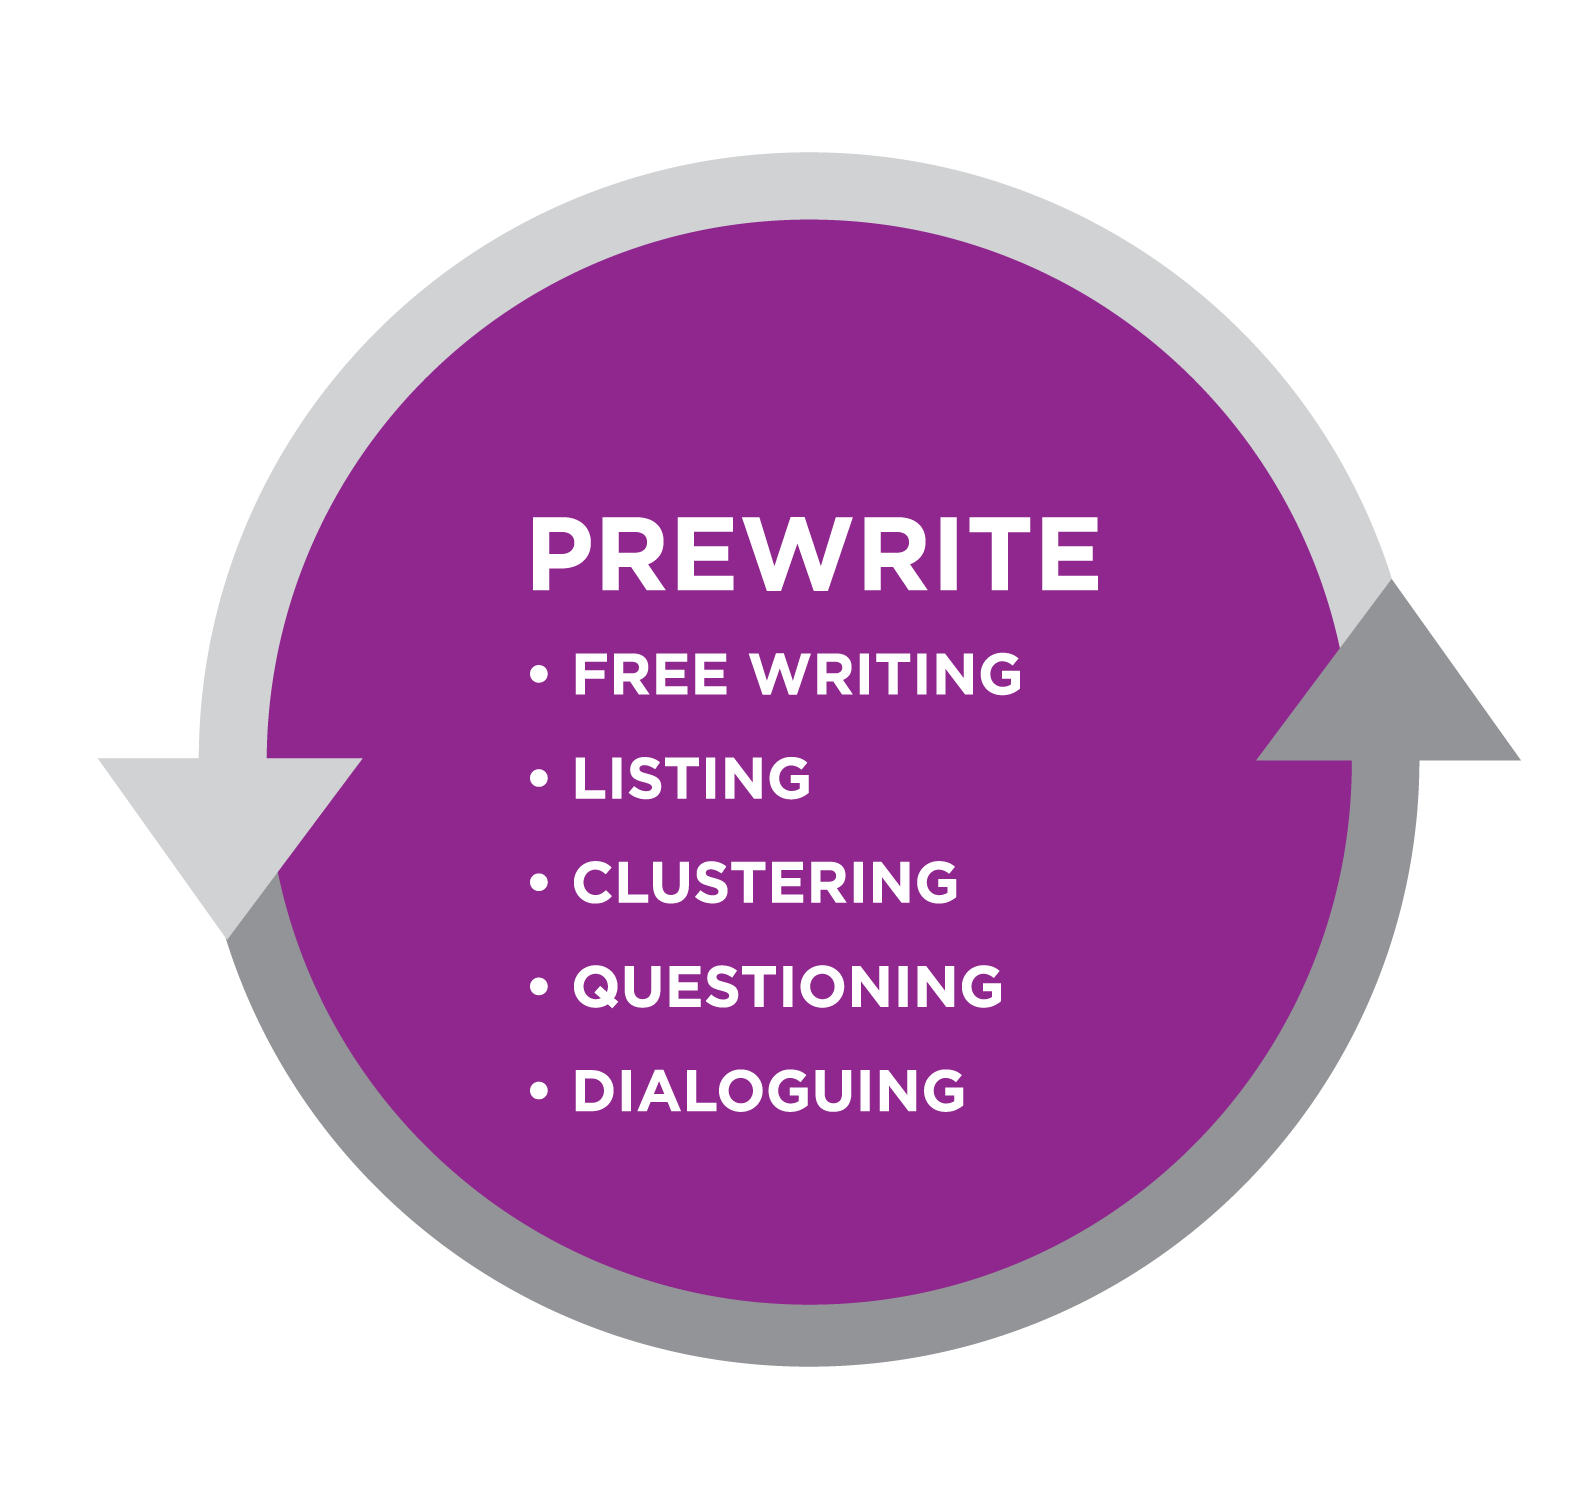 Graphic titled Prewrite. Bullet list: Free writing, listing, clustering, questioning, dialoguing. All text in a purple circle bordered by gray arrows.